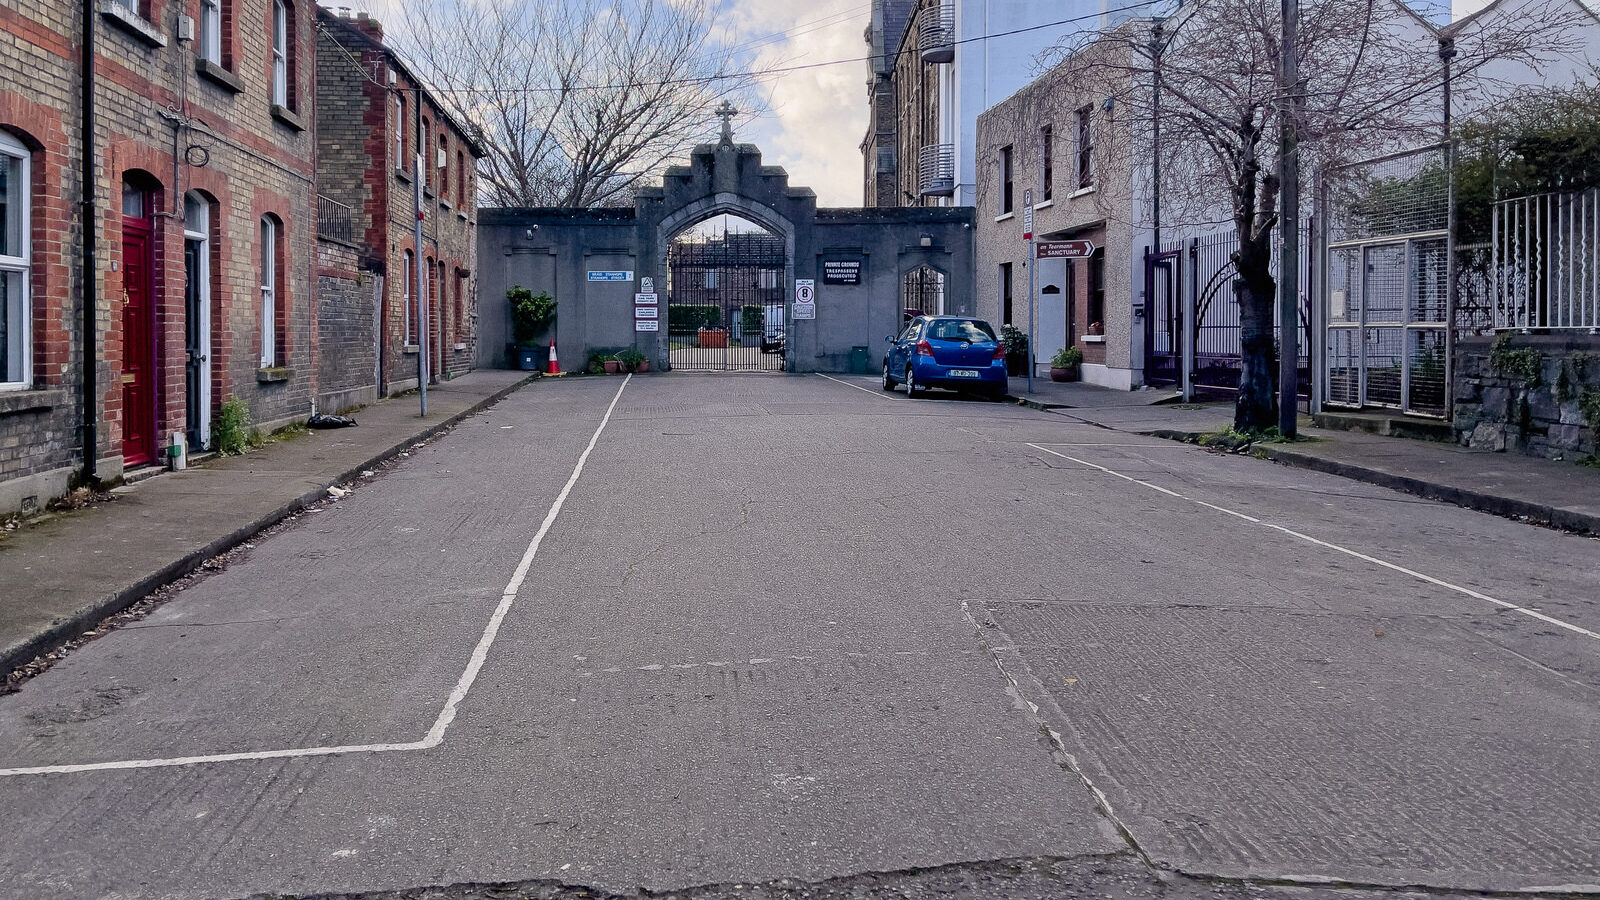 EXPLORING GRANGEGORMAN LOWER [WHICH IS BOTH A STREET AND AN AREA OR DISTRICT]-229016-1